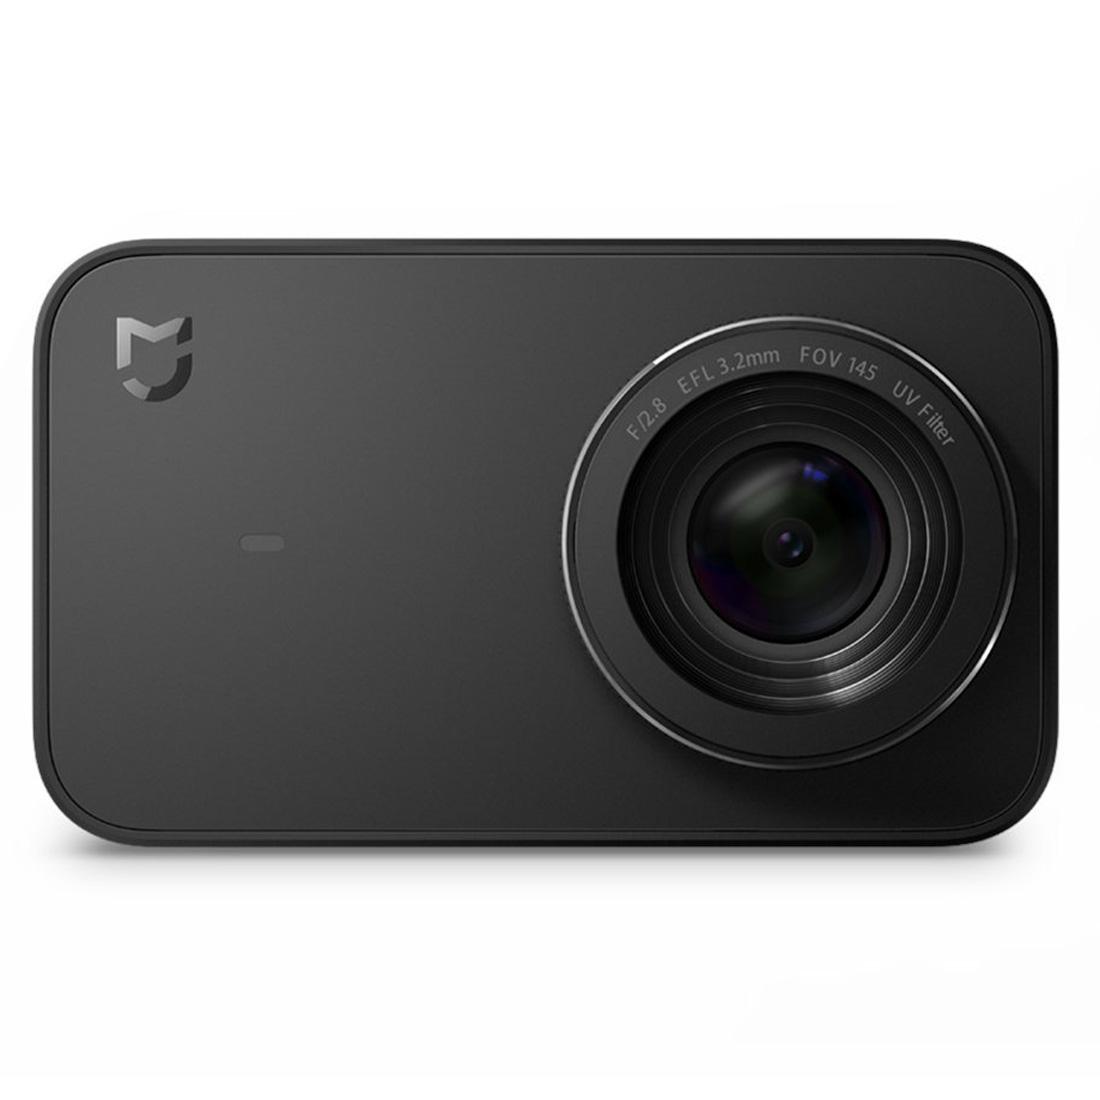 Original Xiaomi Mijia Small Camera Ultra HD 4K WiFi Action Camera, 2.4 inch Touch Screen, 145 Degree Wide Angle Lens, Support Bluetooth(Black) - intl